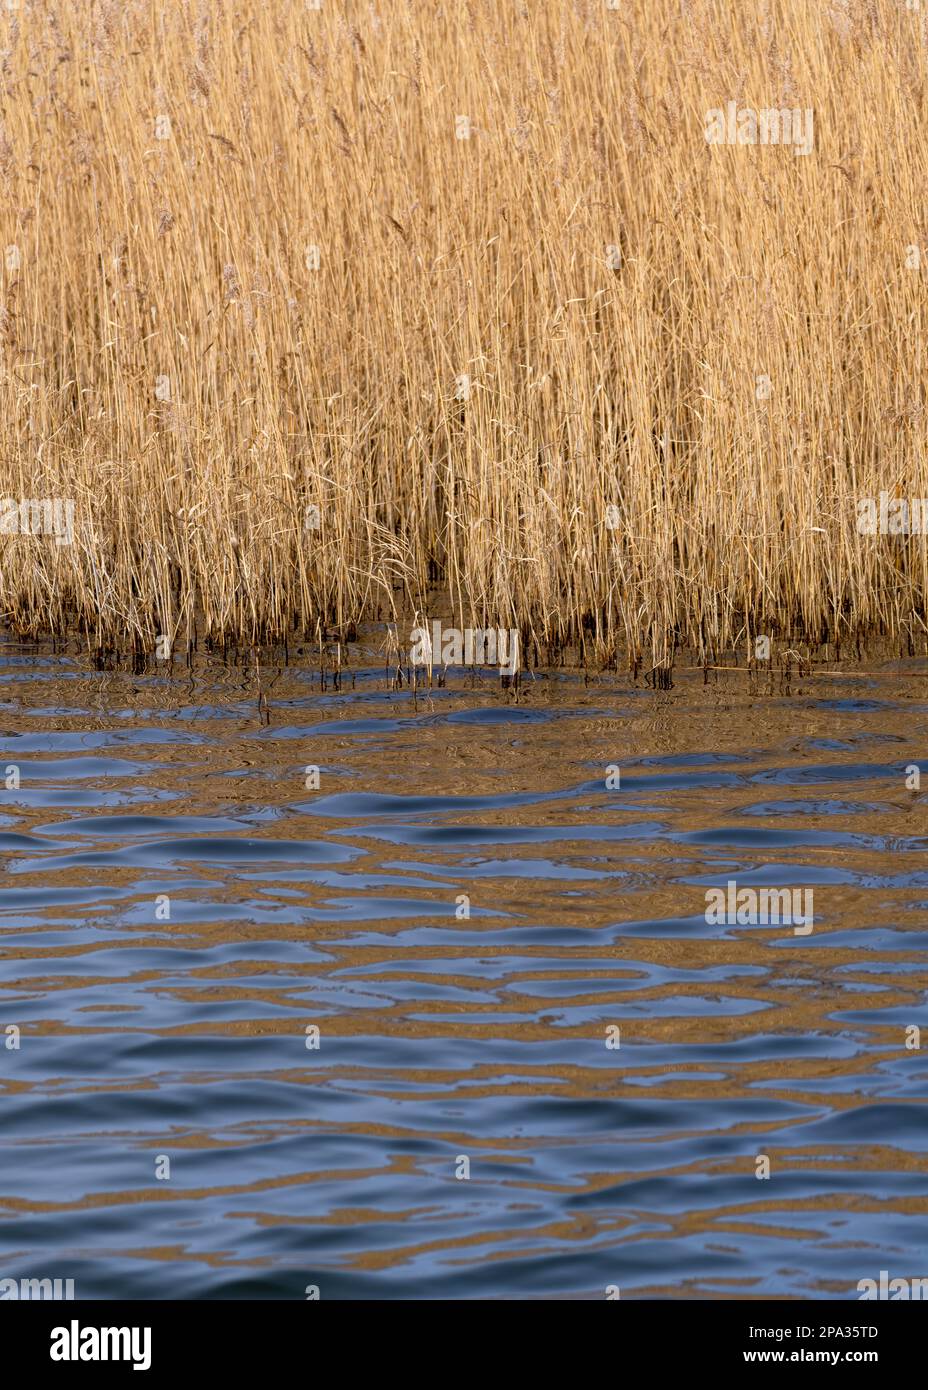 Reed stems in a large reed bed, reflecting in the blue water of a lake Stock Photo